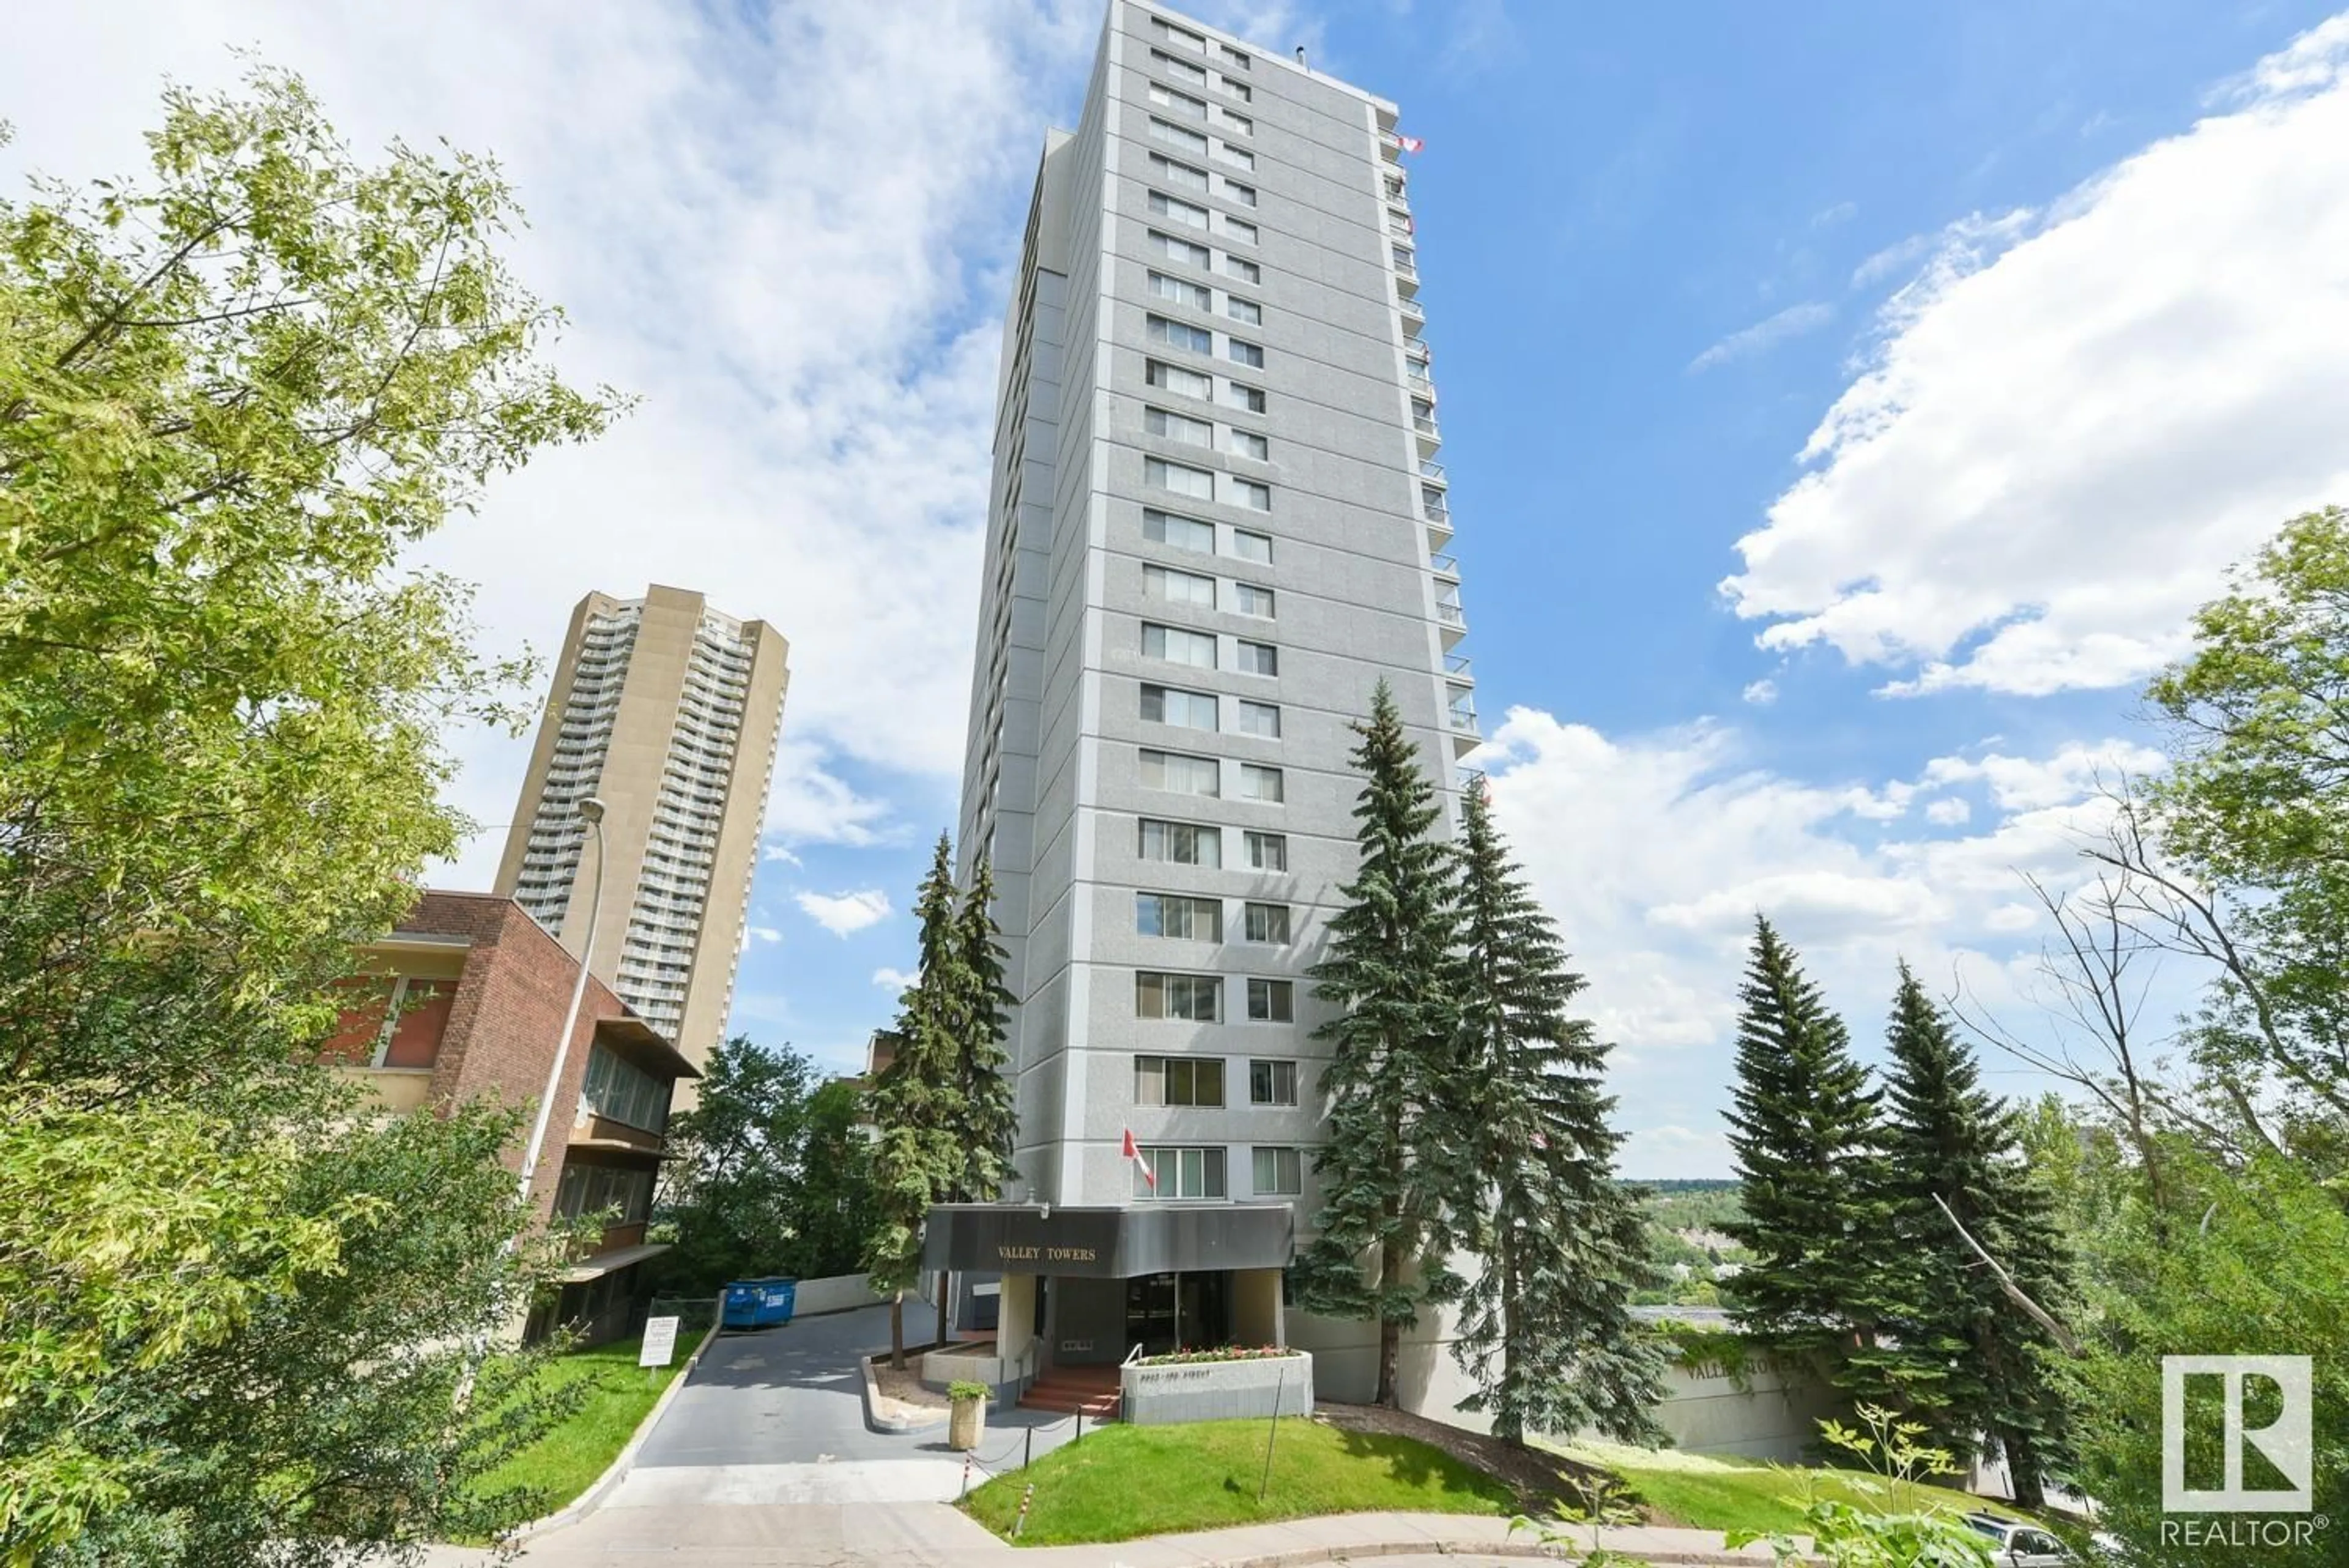 A pic from exterior of the house or condo for #602 9923 103 ST NW, Edmonton Alberta T5K2J3